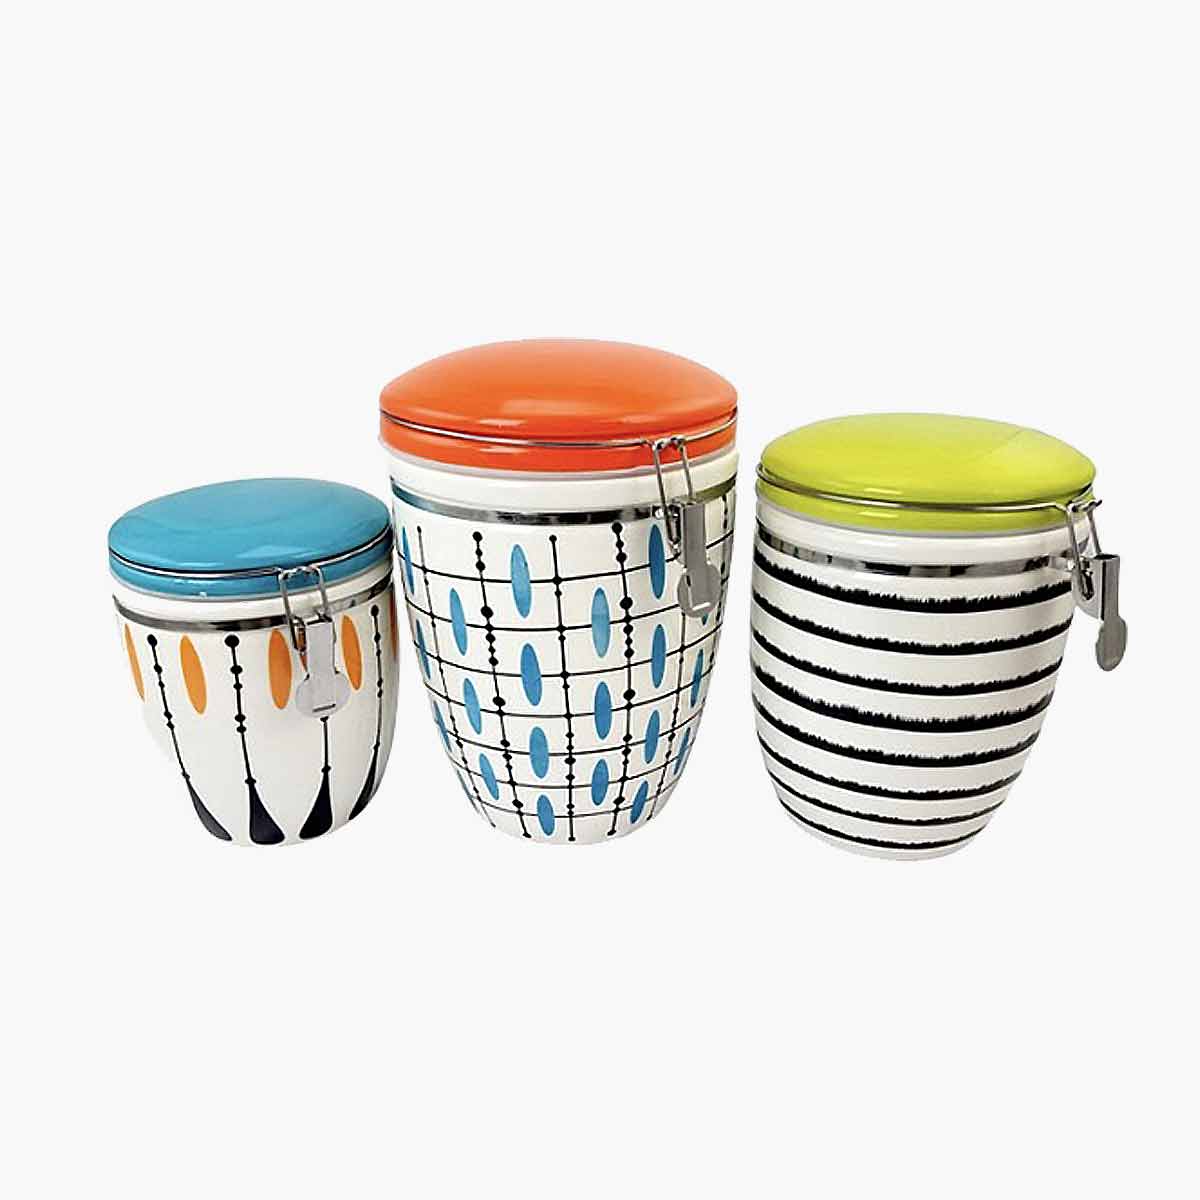 A 3 piece kitchen canister set with retro patterns.